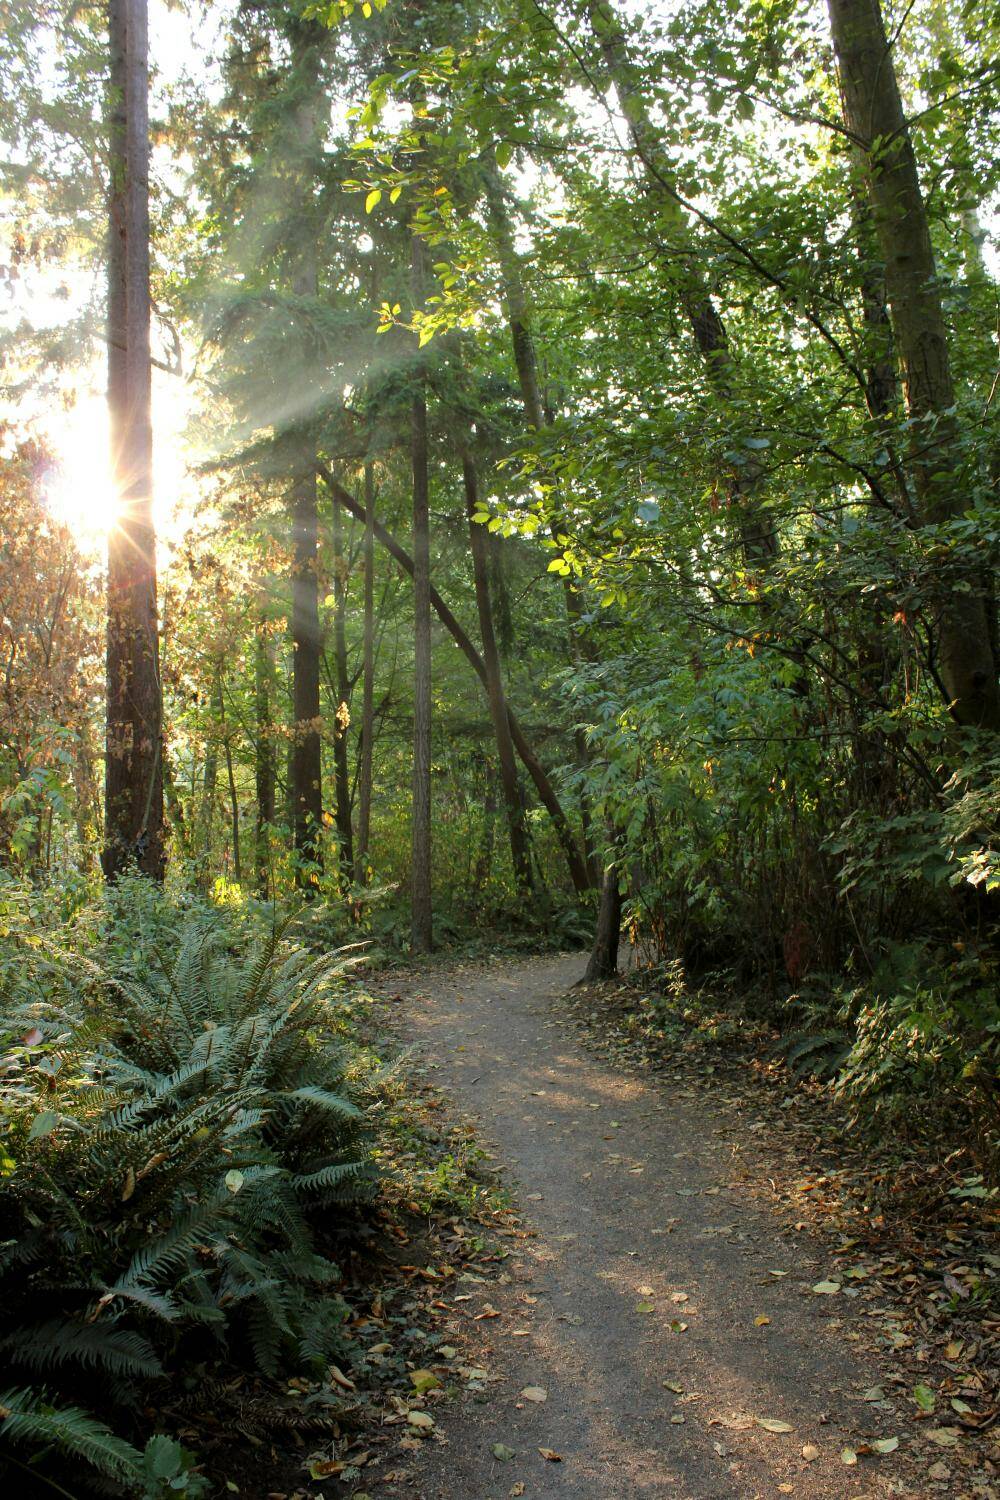 Pictured is a portion of the 113-acre Pioneer Park forest. Photo courtesy of the city of Mercer Island